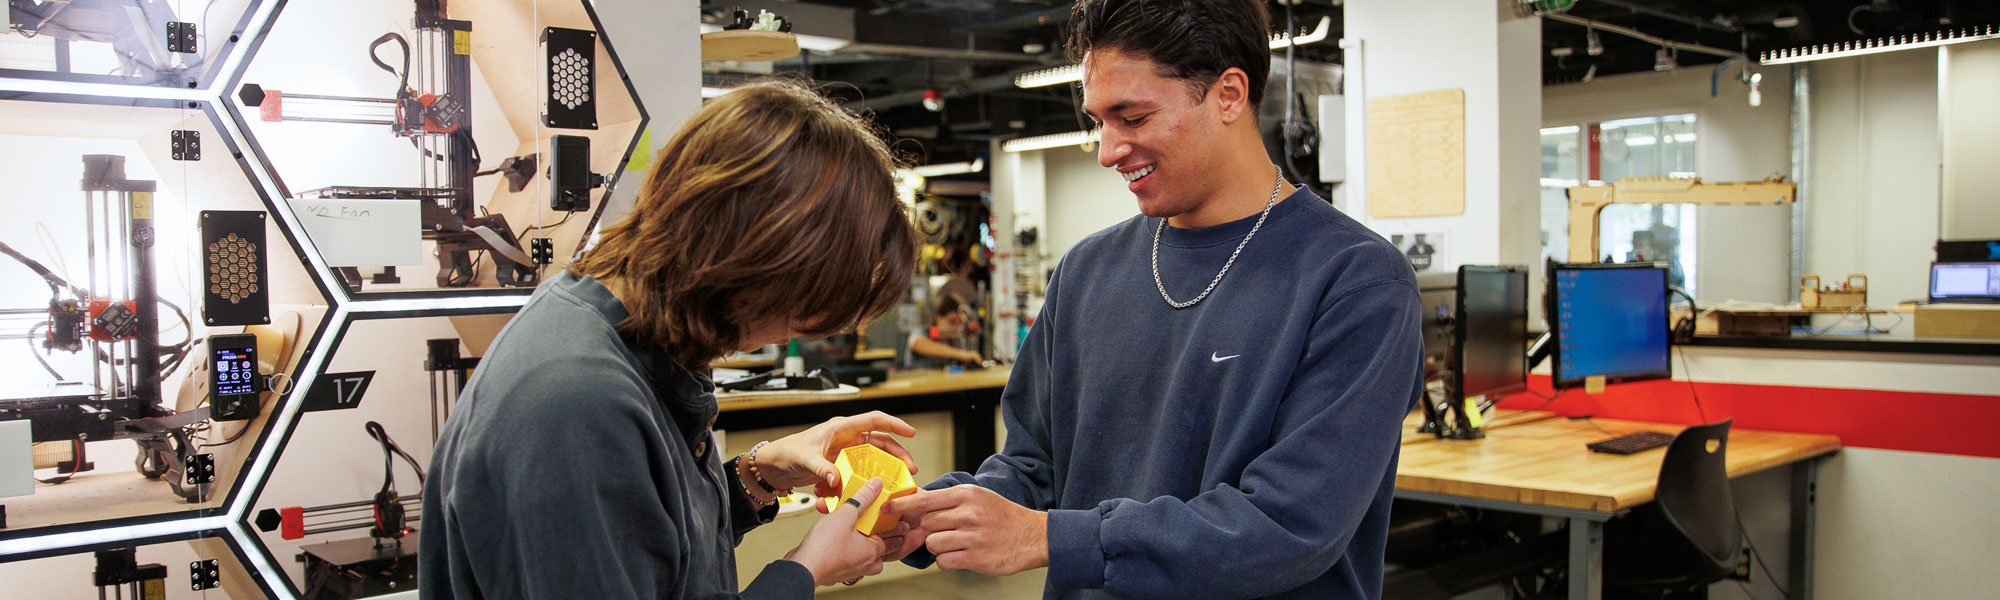 Two students work together in the cooperative workspace inside the innovation hub.